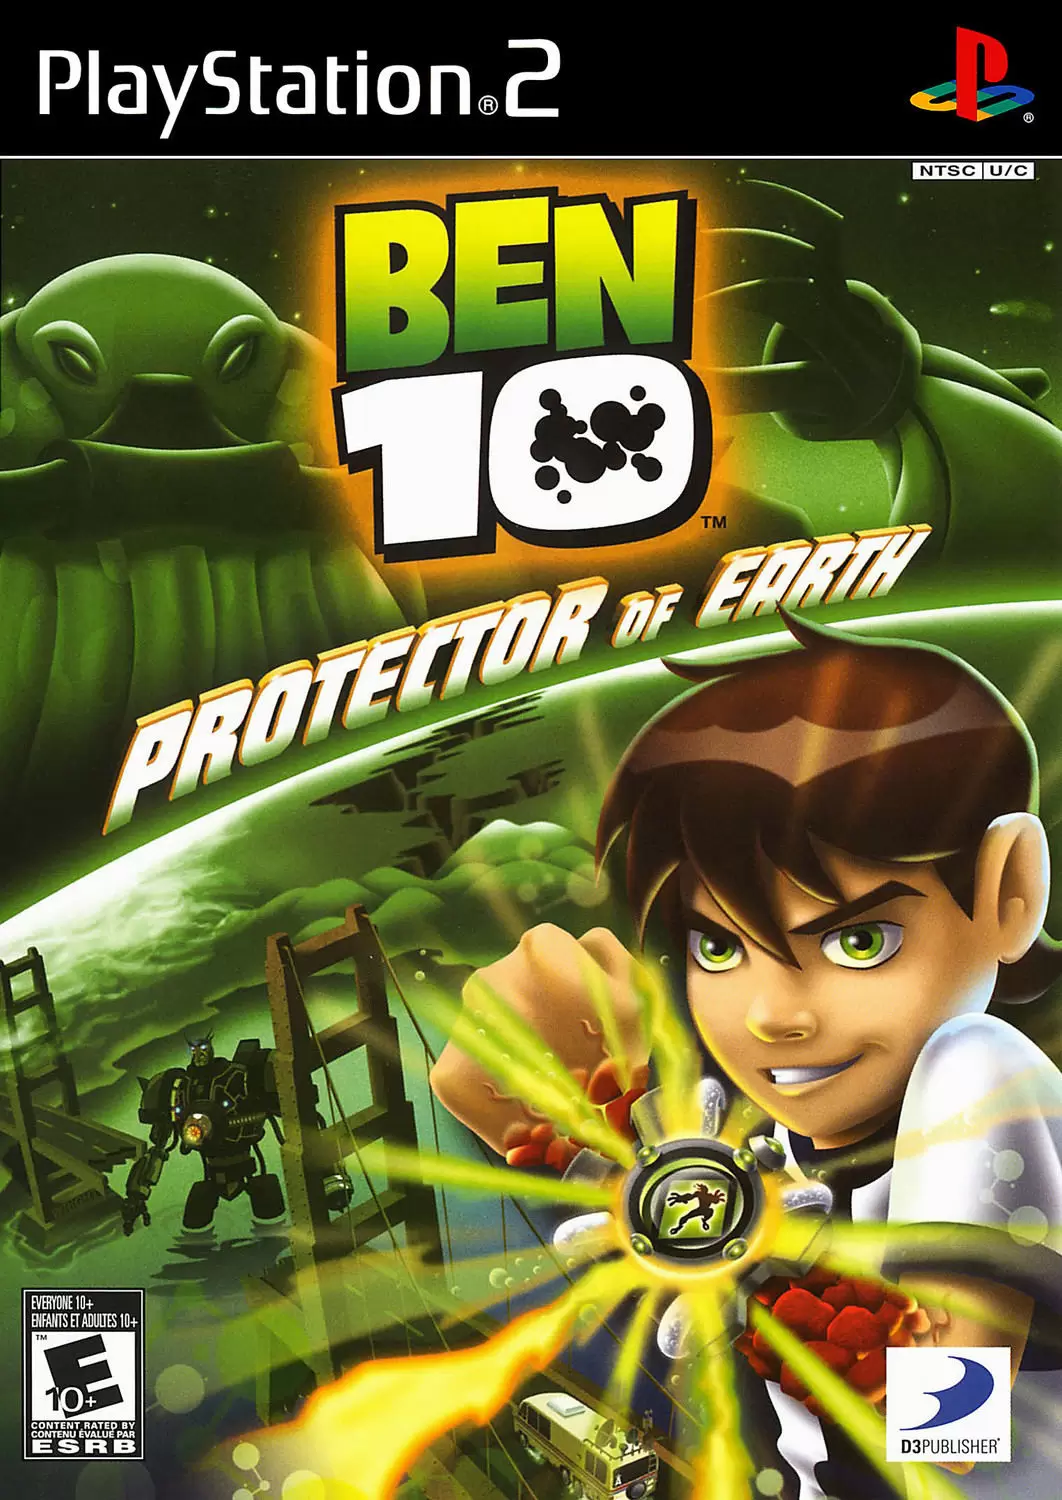 PS2 Games - Ben 10: Protector of Earth